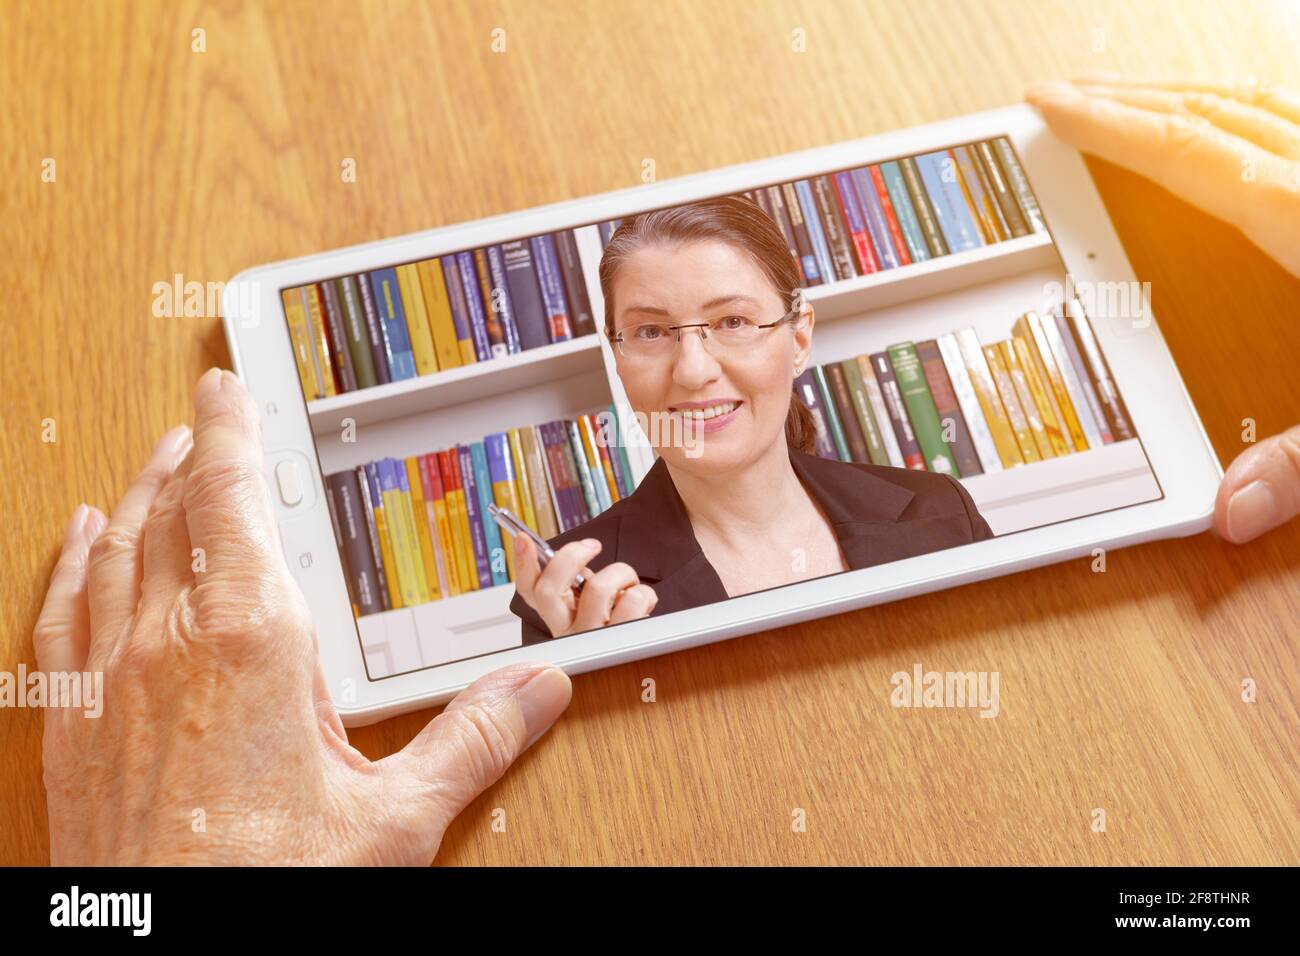 Teletherapy or online counseling concept: friendly middle aged woman talking on a tablet pc in the hands of an elderly woman. Stock Photo